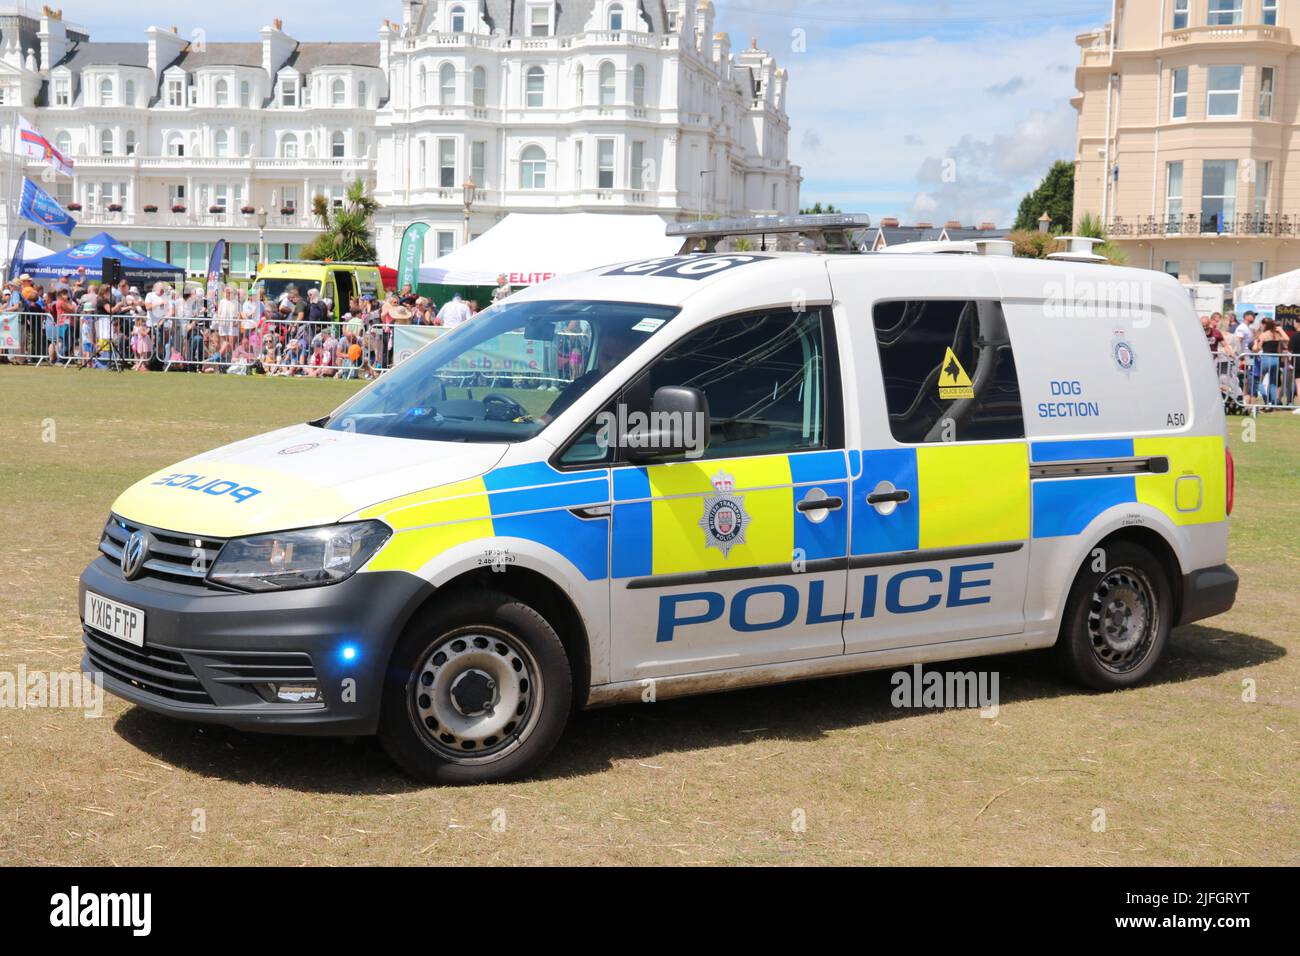 VW VOLKSWAGEN CADDY POLICE DOG VAN OF BRITISH TRANSPORT POLICE AT A 999 WEEKEND EMERGENCY SERVICES DISPLAY IN EASTBOURNE IN 2022 Stock Photo